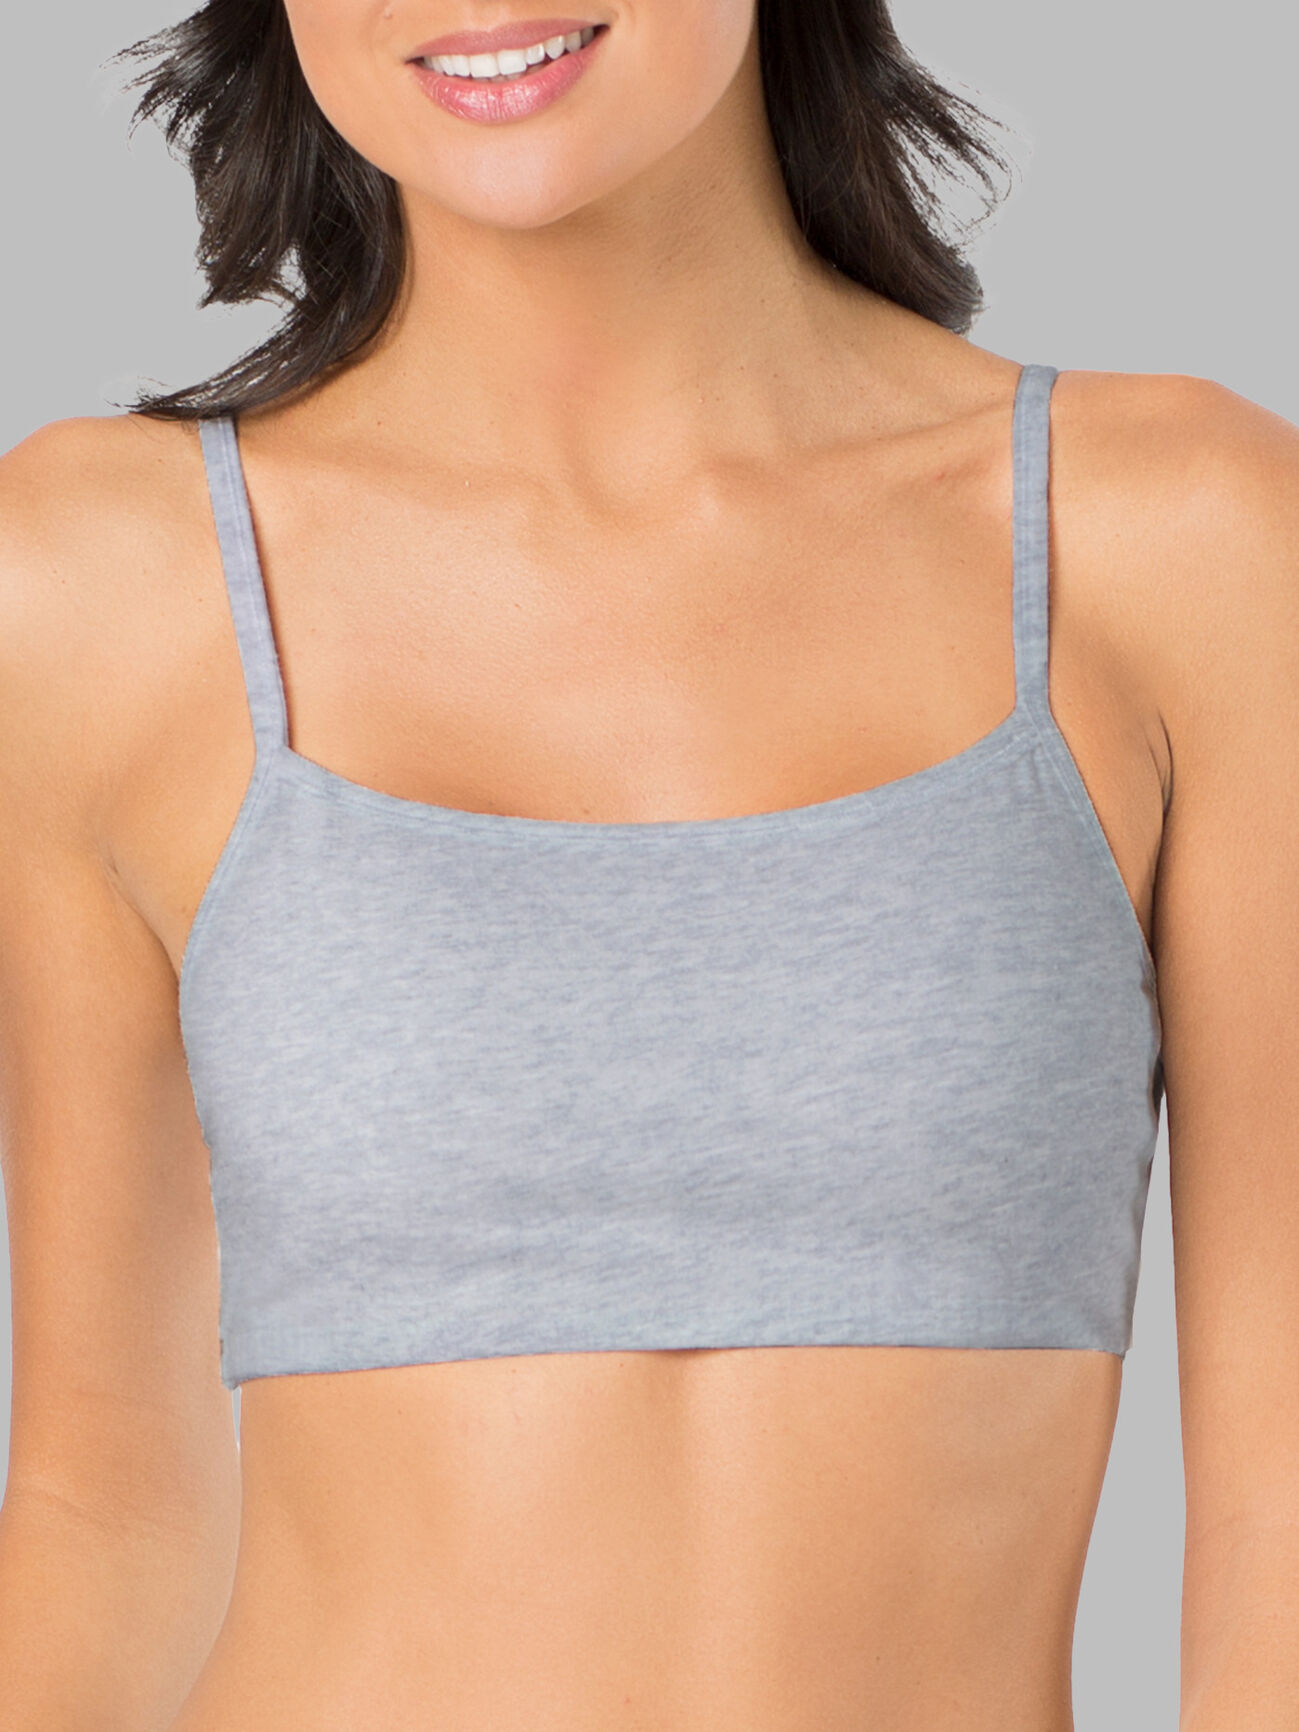 Fruit of the Loom Women's Spaghetti Strap Cotton Sports Bra, 3-Pack,  Style-9036